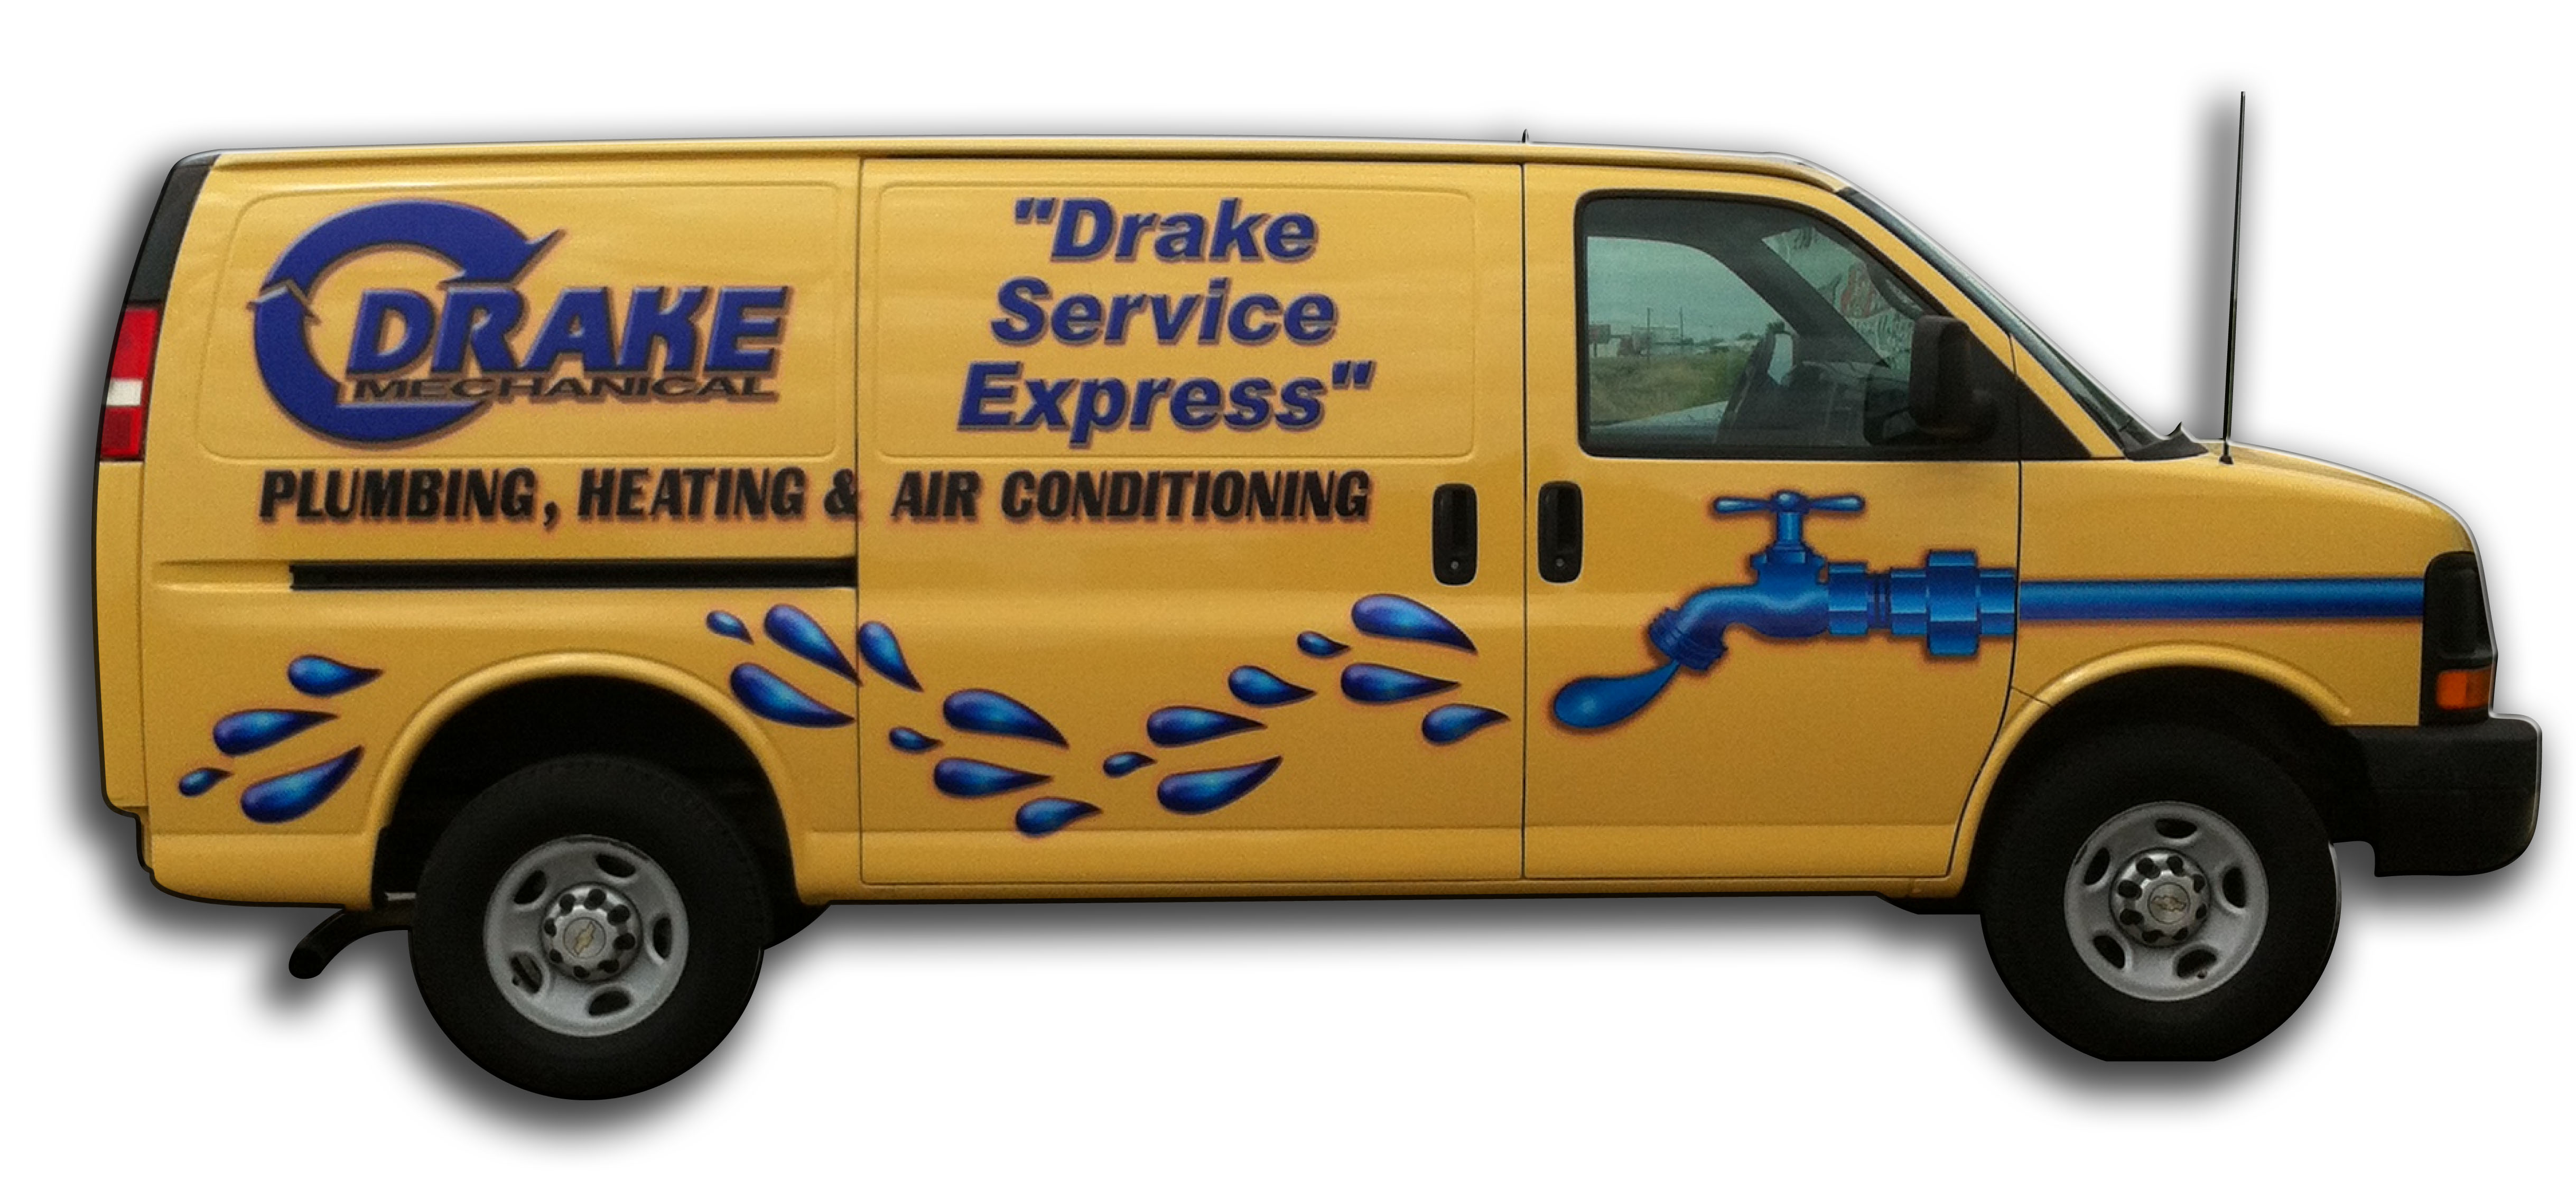 Drake Mechanical Plumbing Heating and Air Conditioning Service